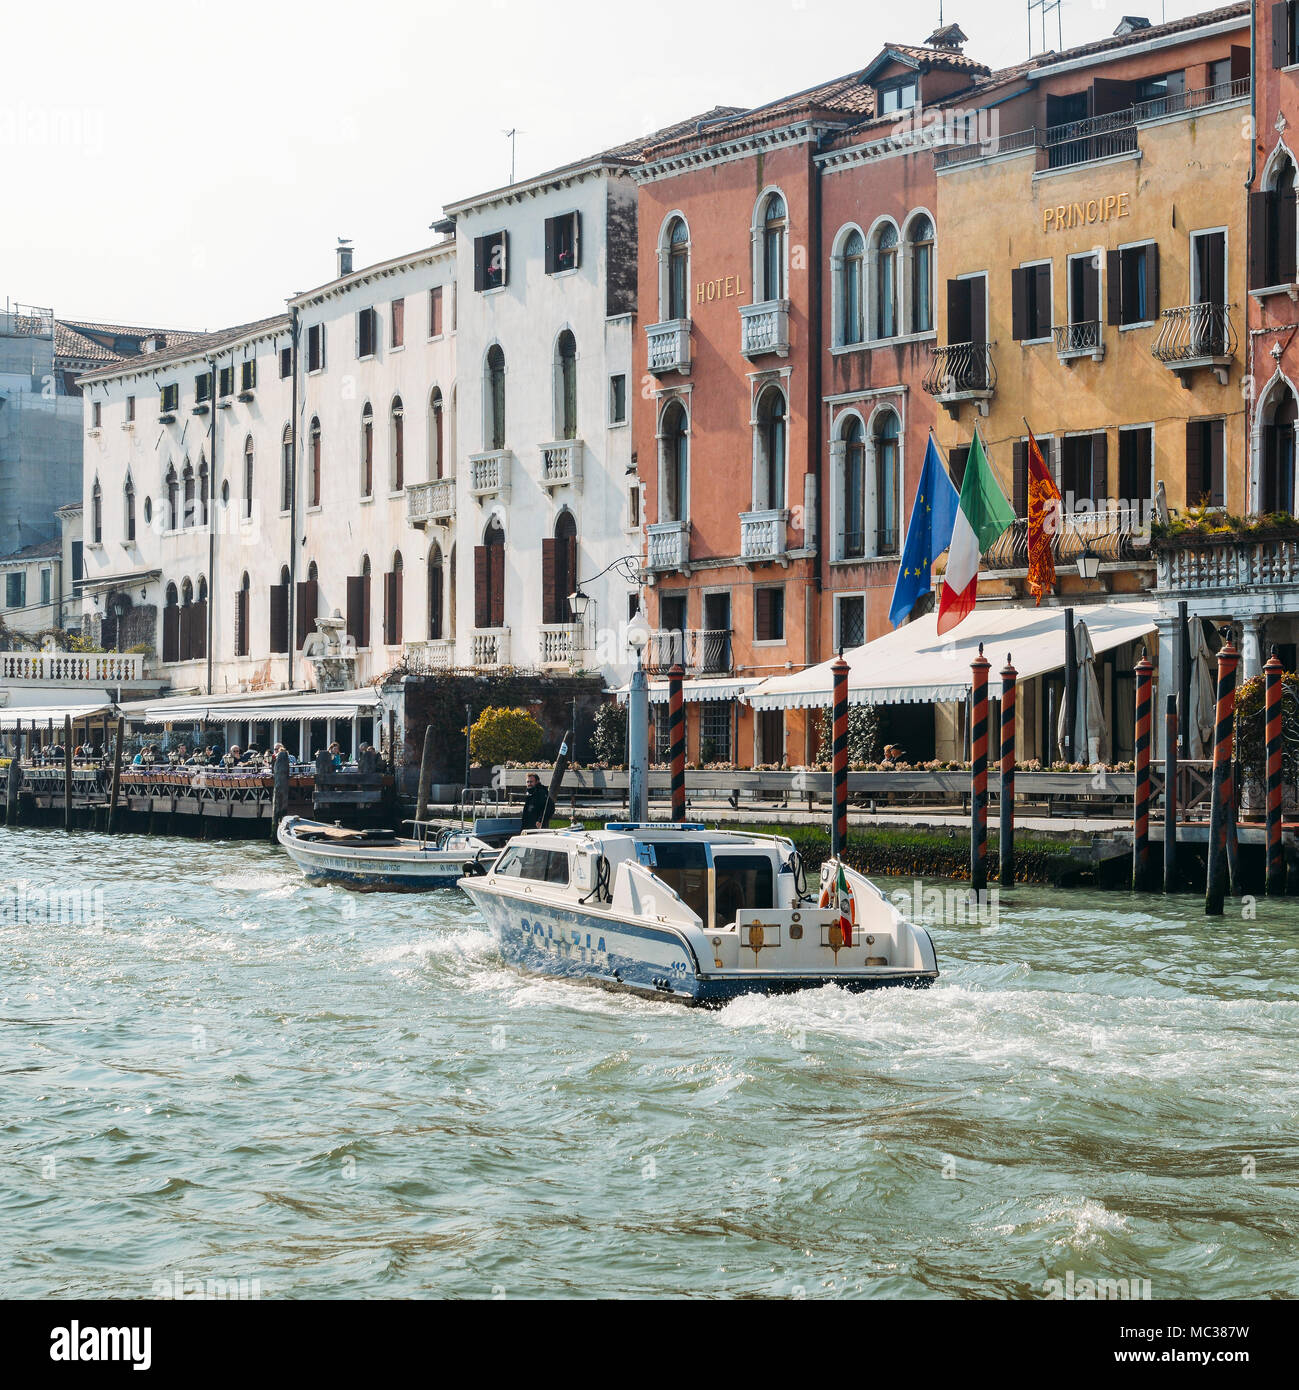 A police boat on the Grand canal in Venice Stock Photo